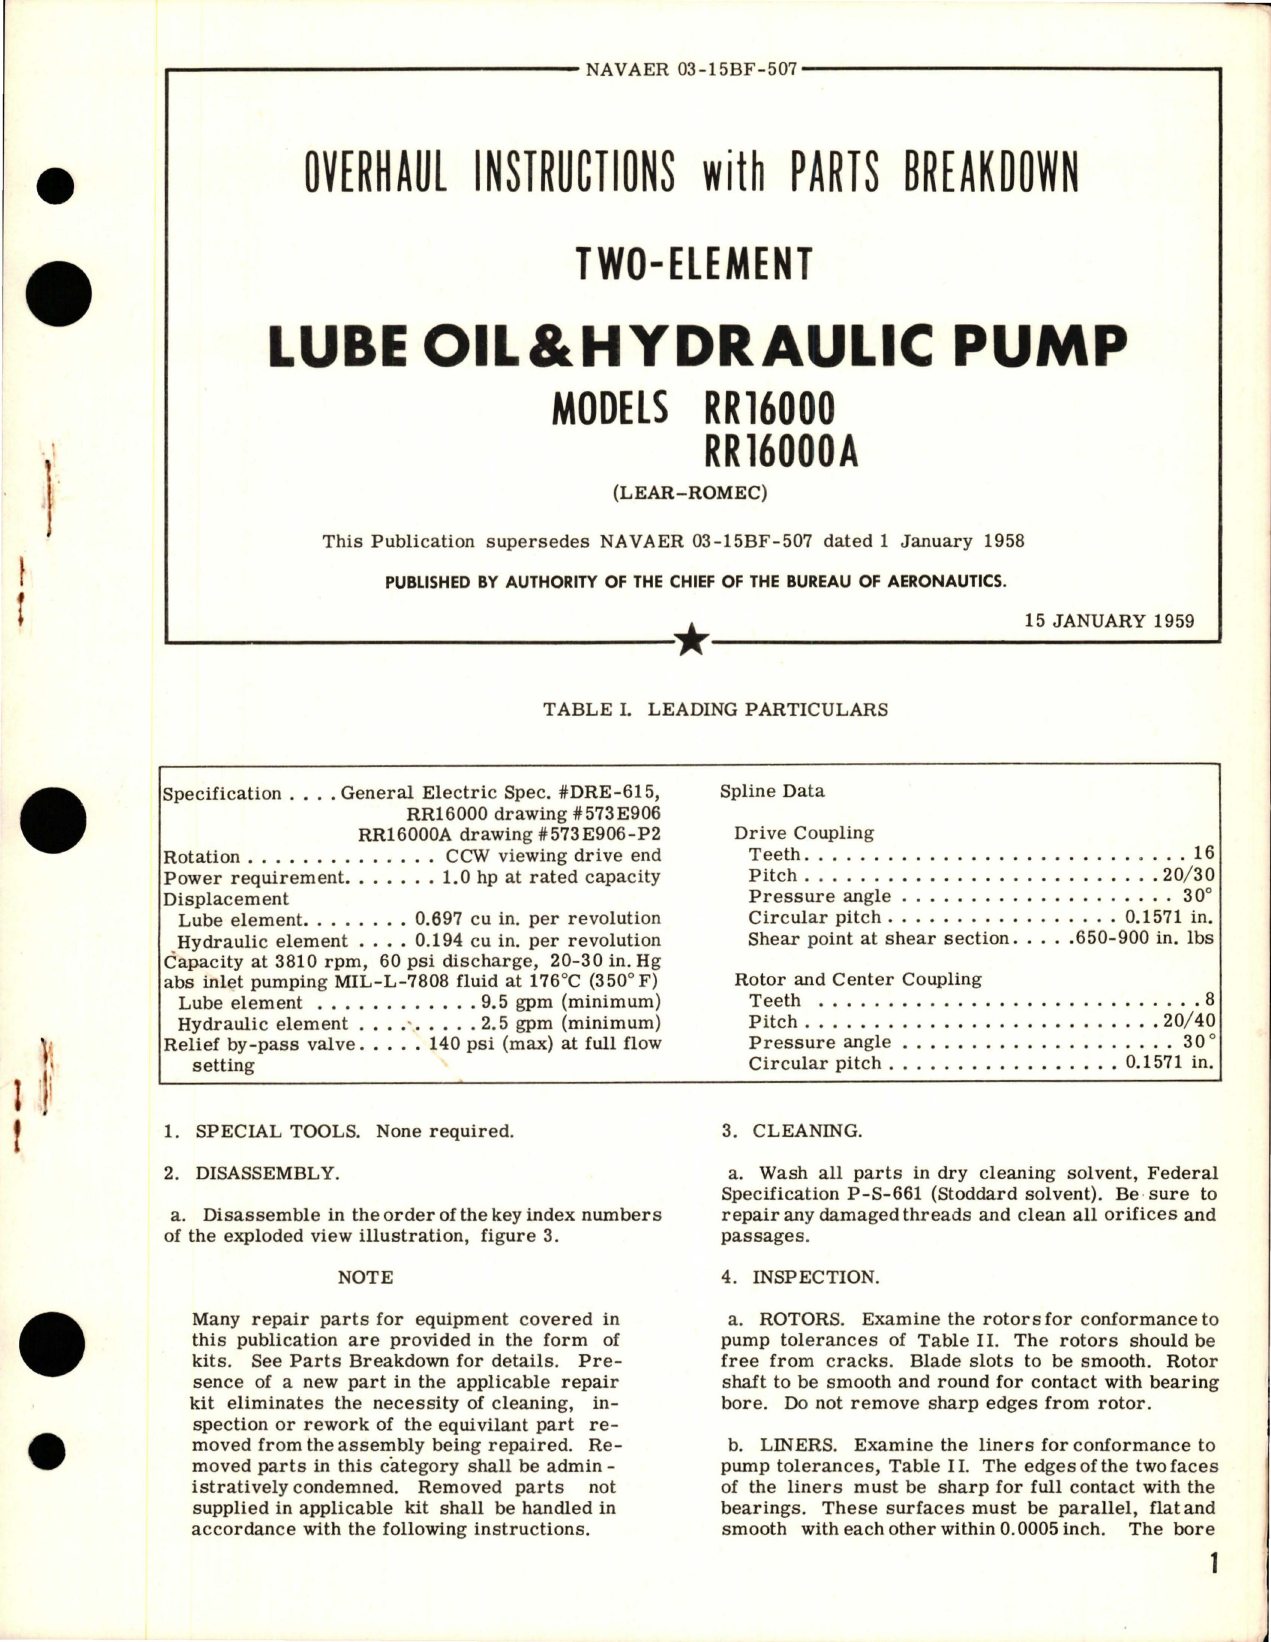 Sample page 1 from AirCorps Library document: Overhaul Instructions with Parts for Two Element Lube Oil & Hydraulic Pump - Models RR16000 and RR16000A